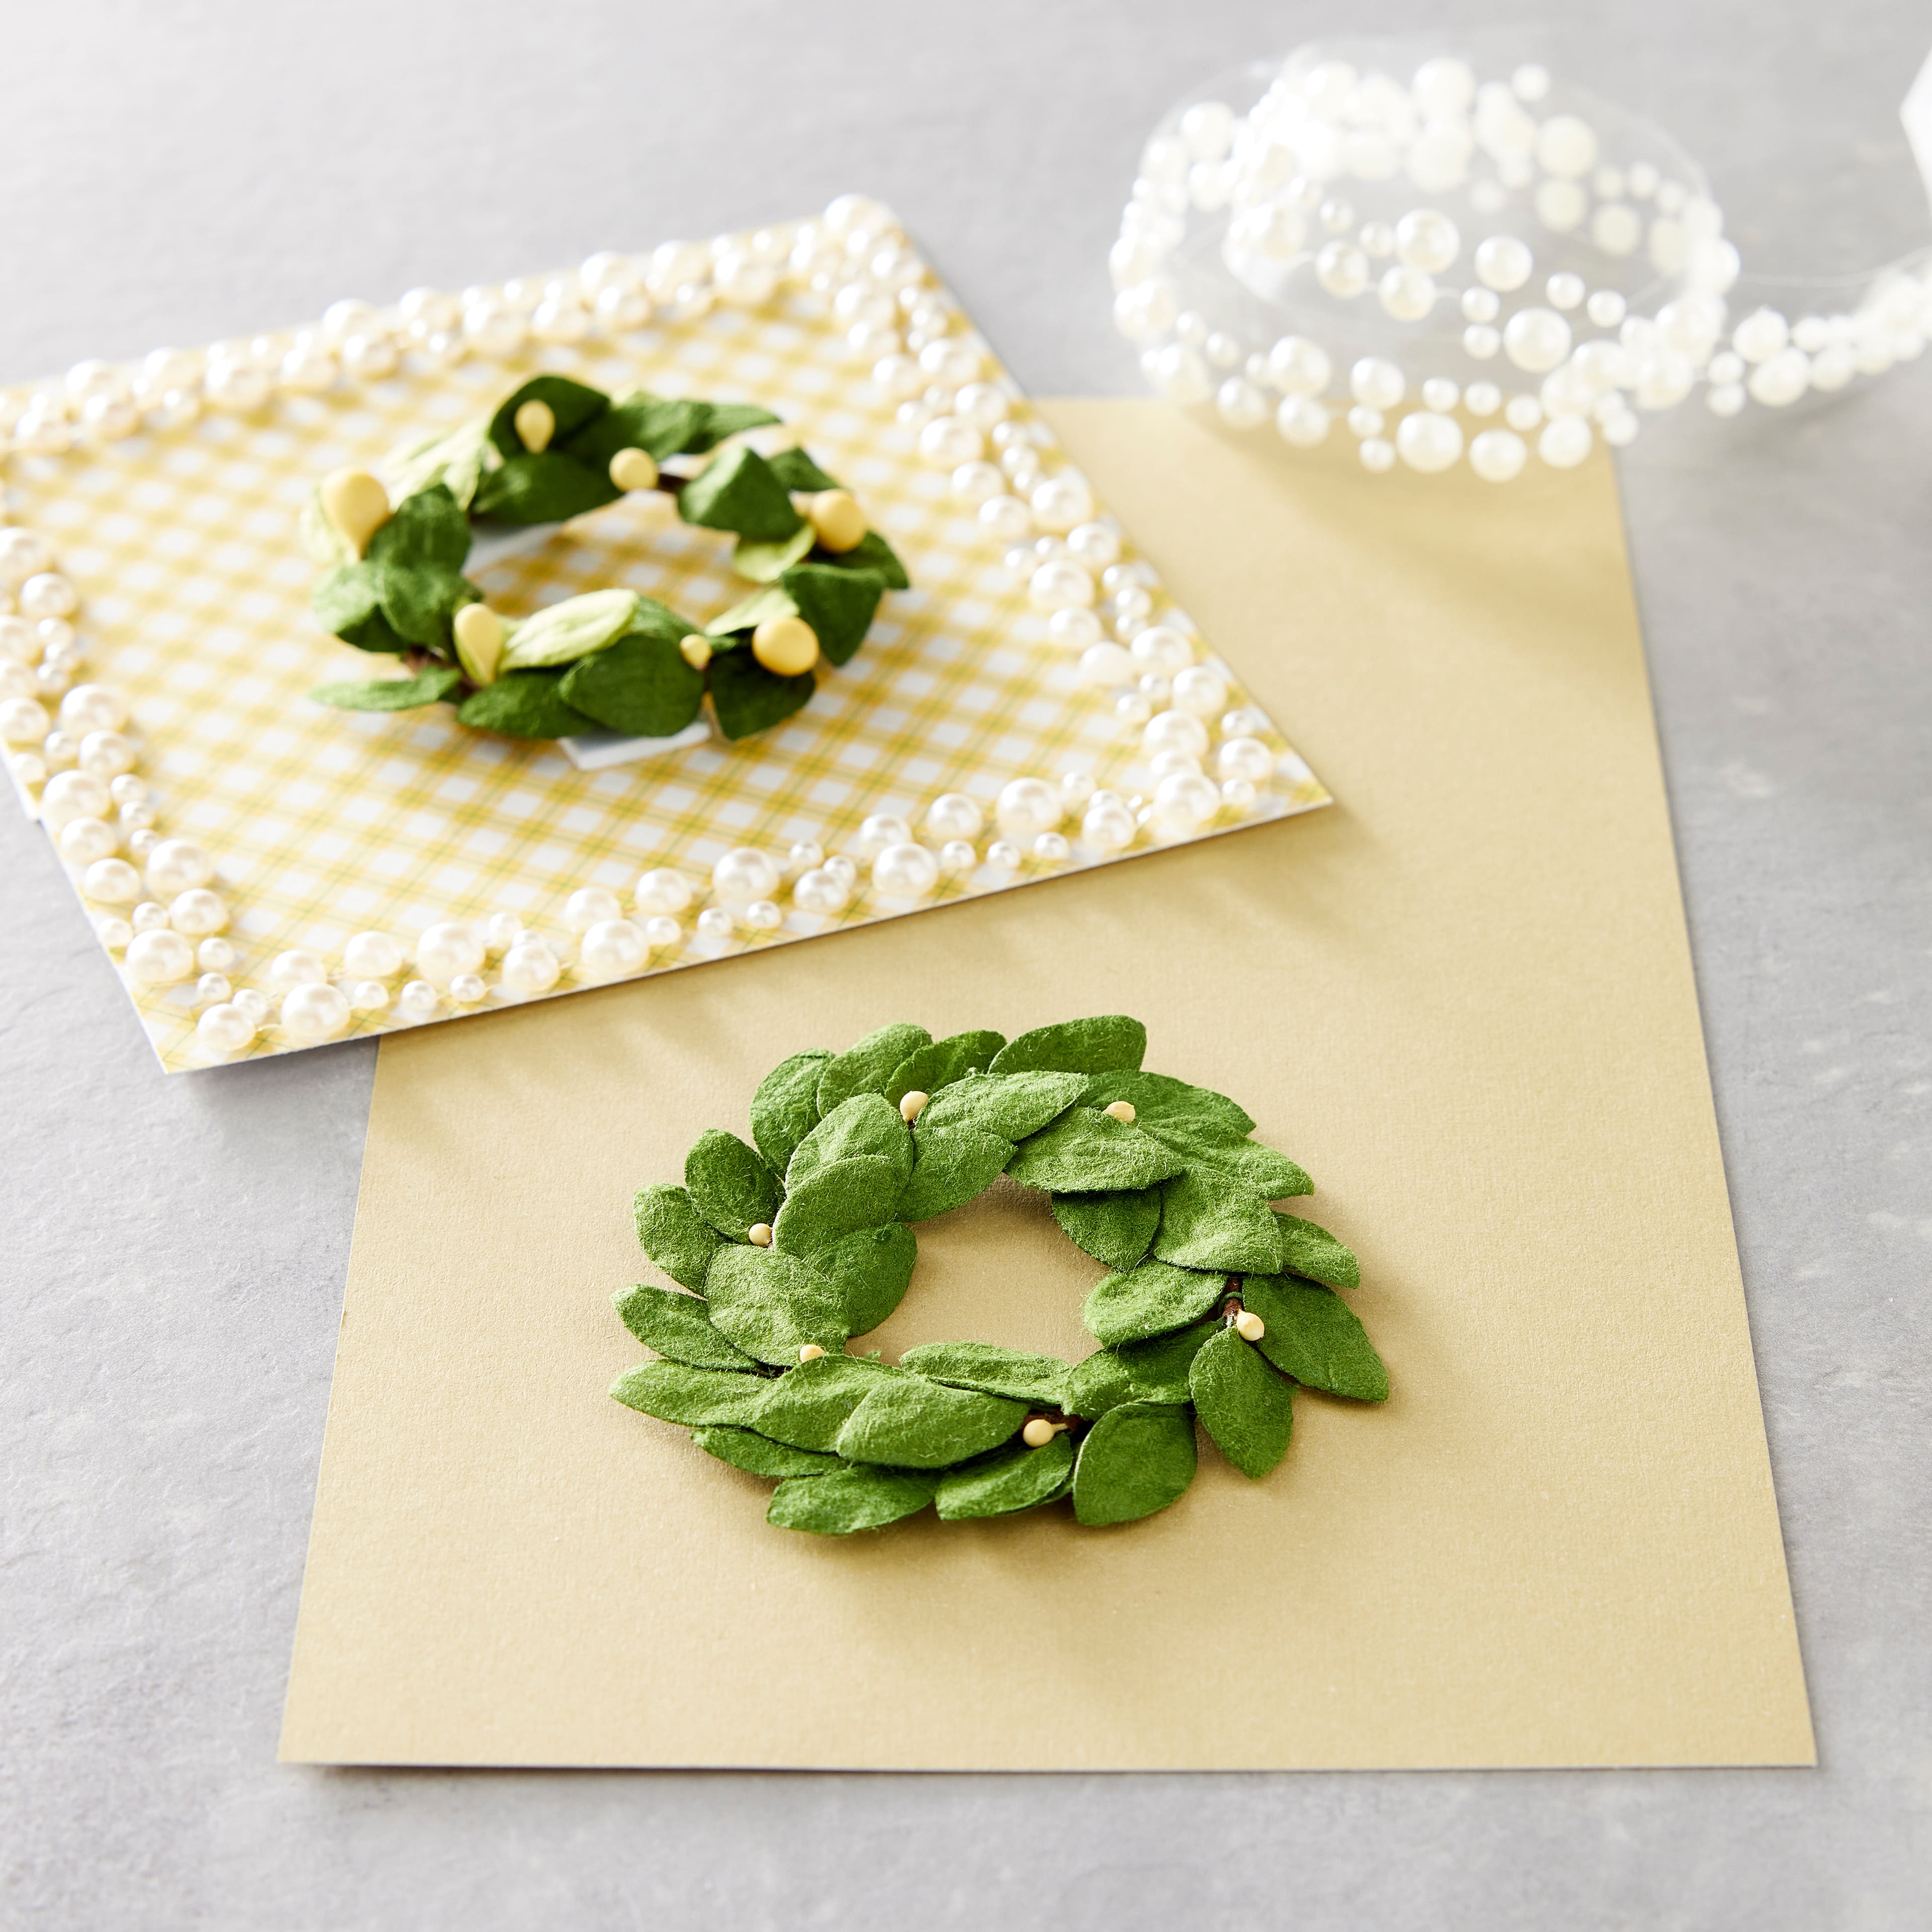 Green Paper Wreath Embellishments by Recollections&#x2122;